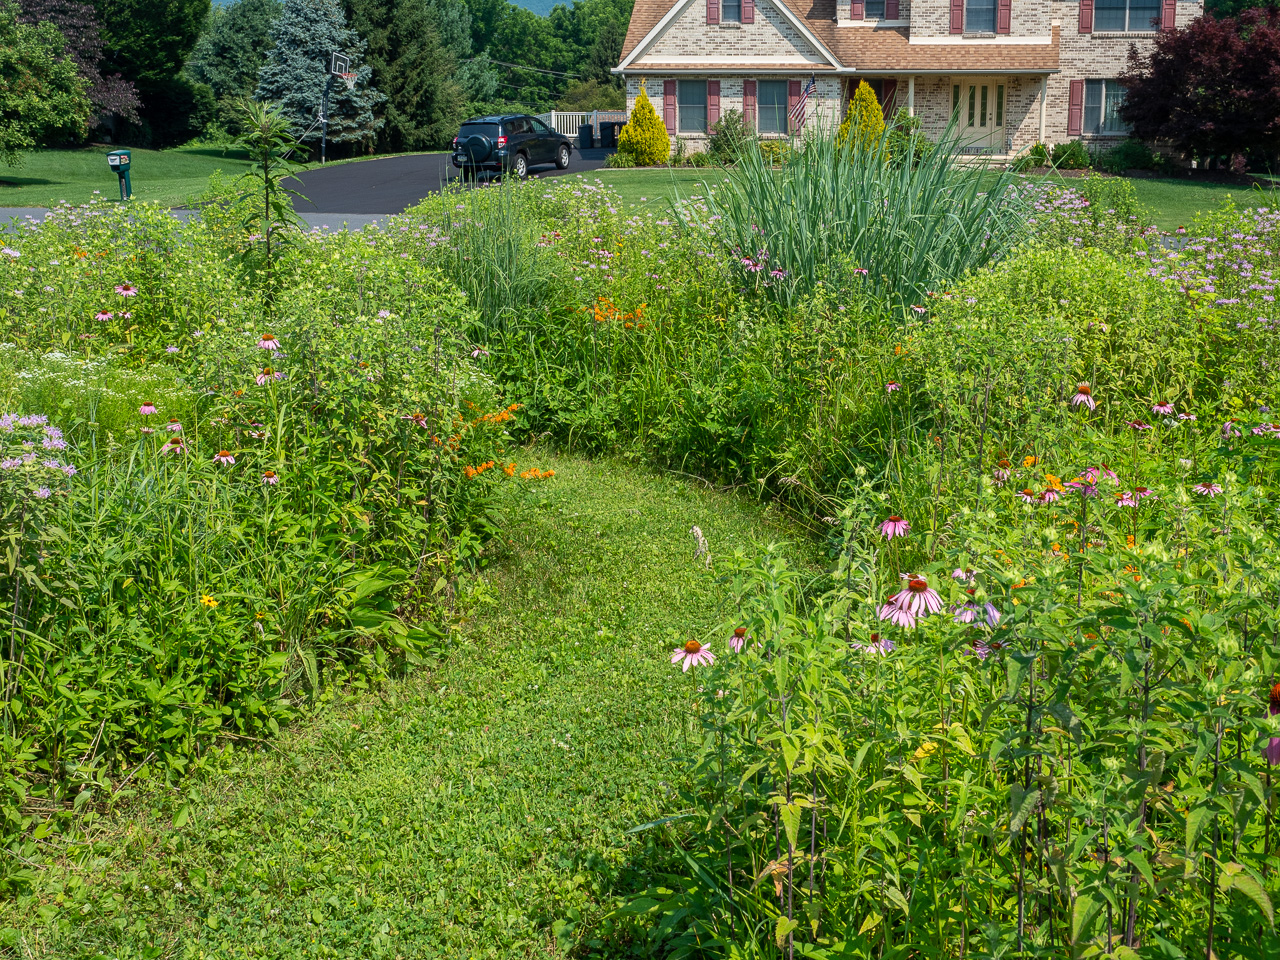 A front yard suburban meadow with a curving lawn path running through